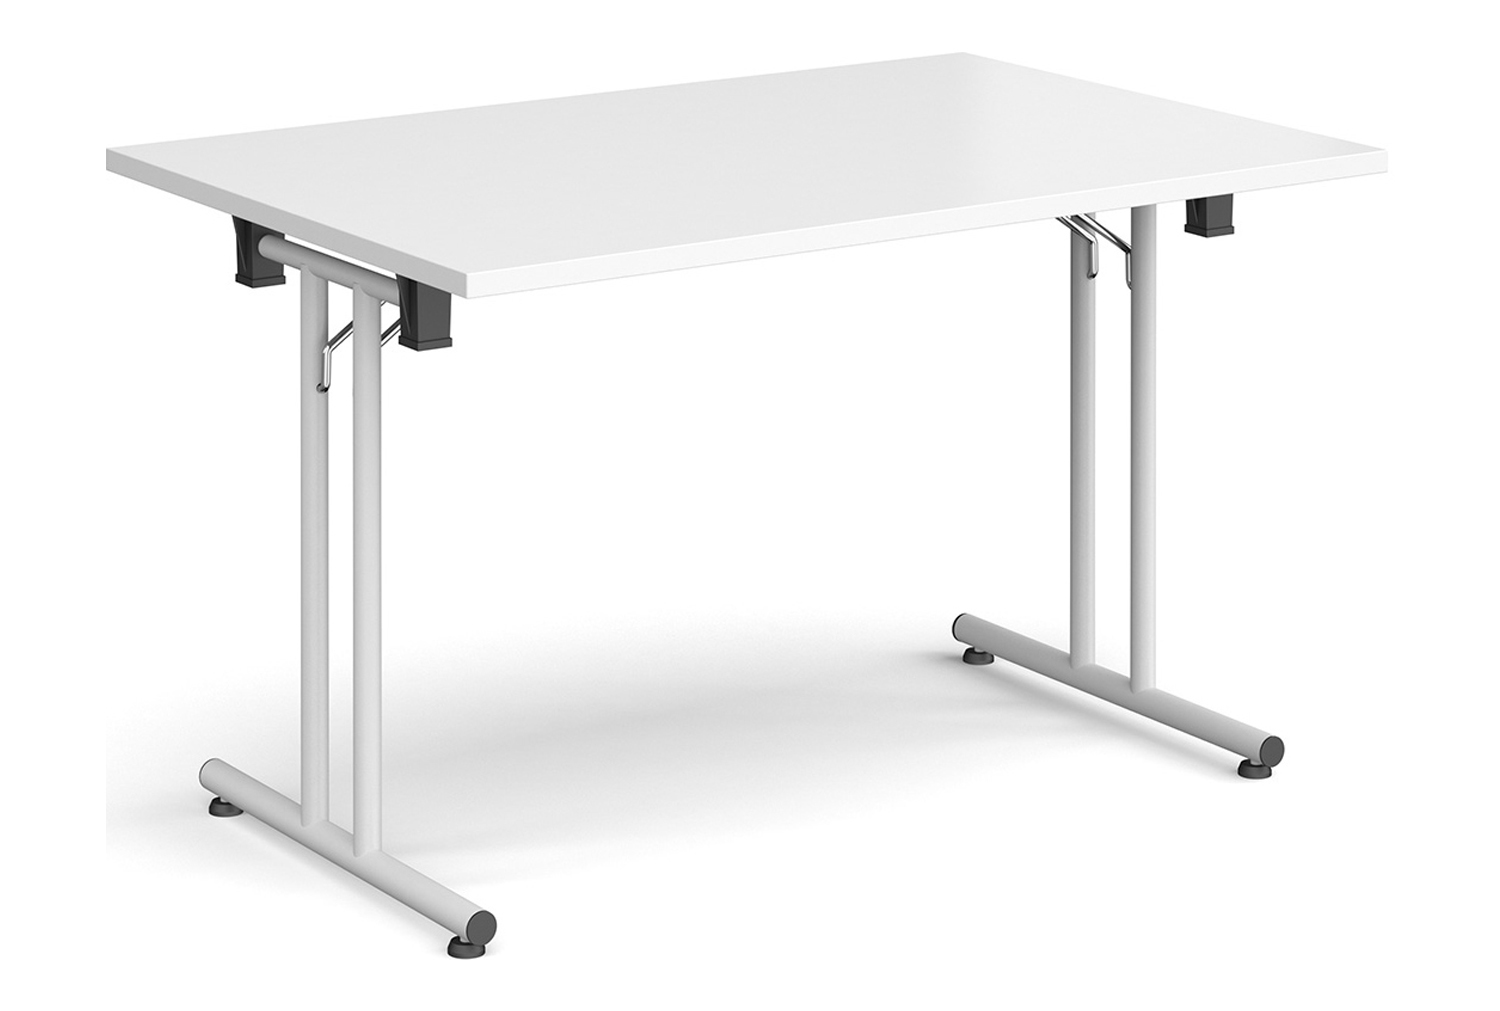 Durand Rectangular Folding Table, 120wx80dx73h (cm), White Frame, White, Express Delivery